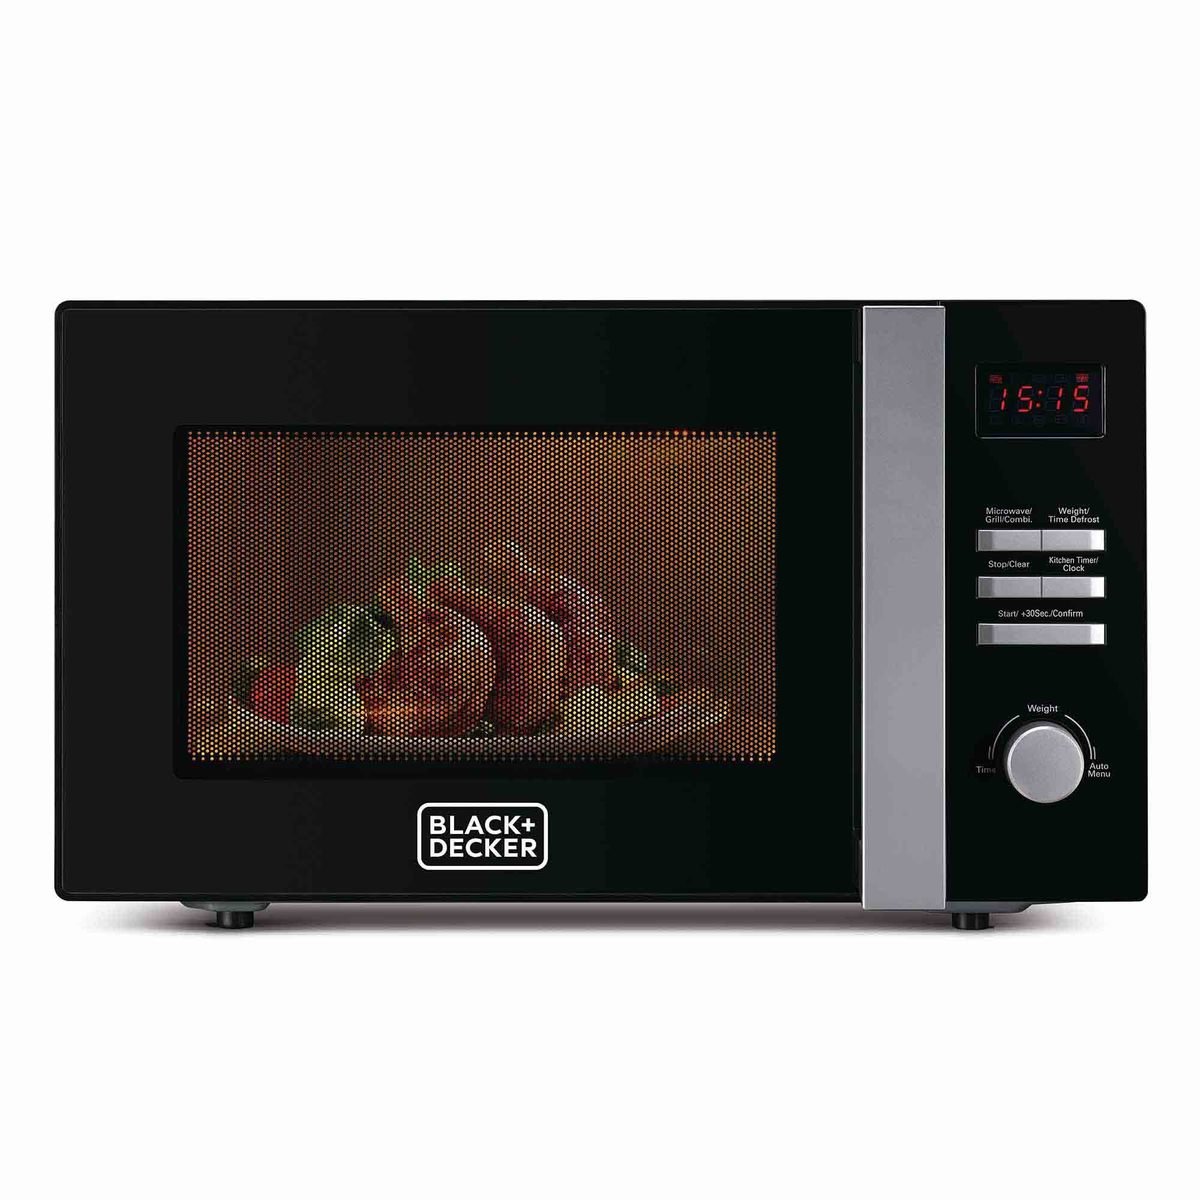 Black+Decker Microwave Oven with Grill - MZ2800PG-B5 28Ltr